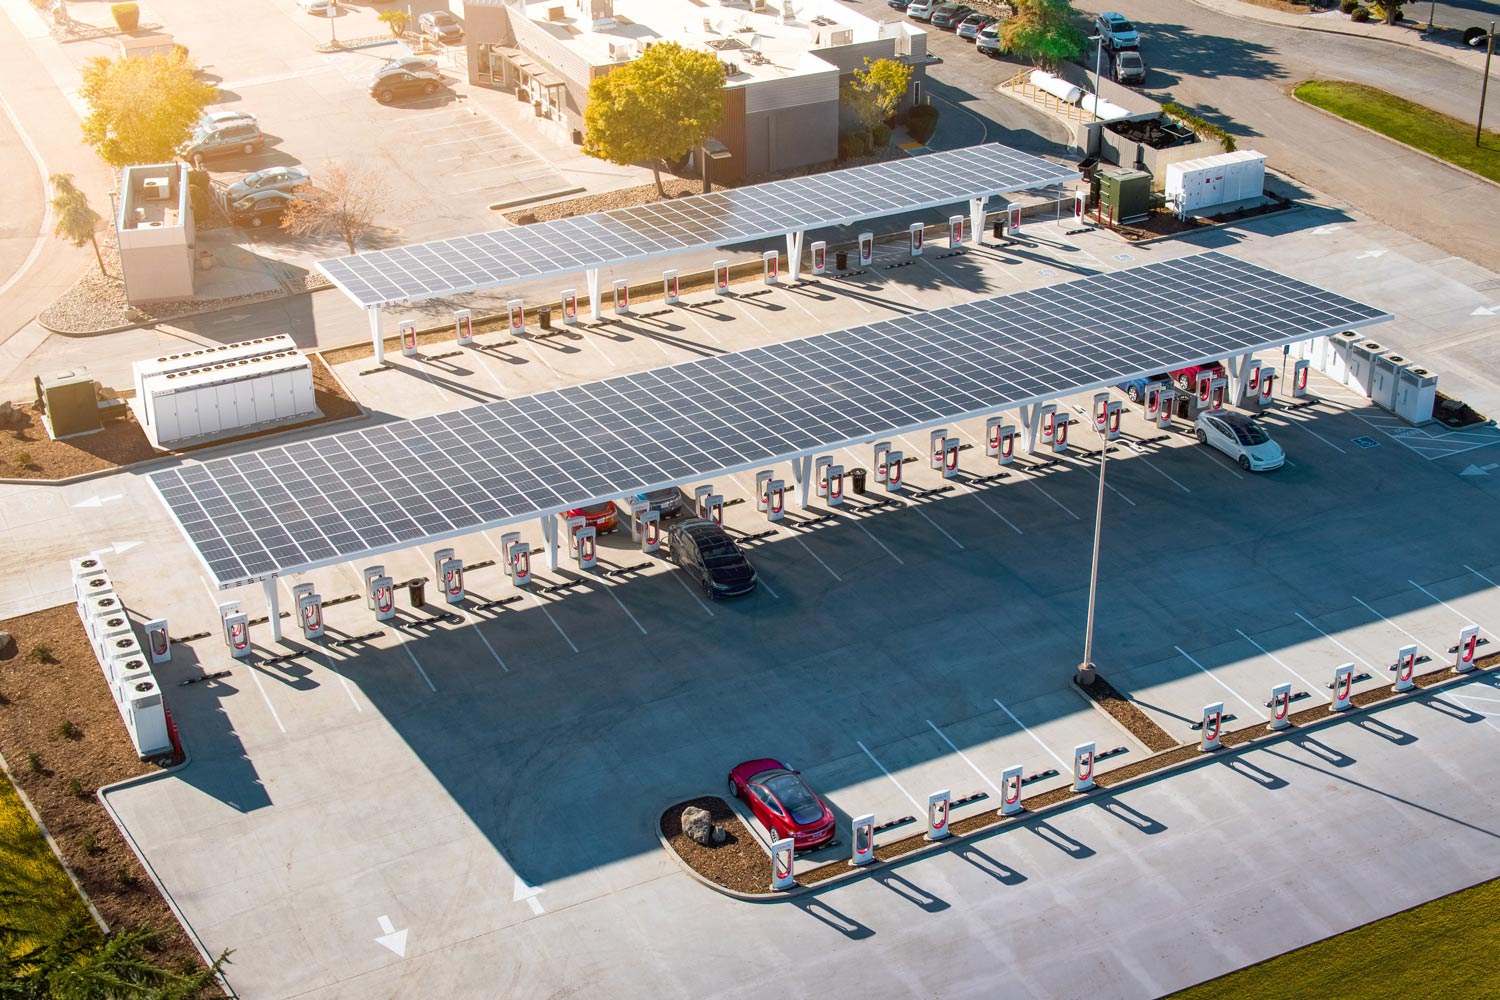 Tesla Supercharger station viewed from the air